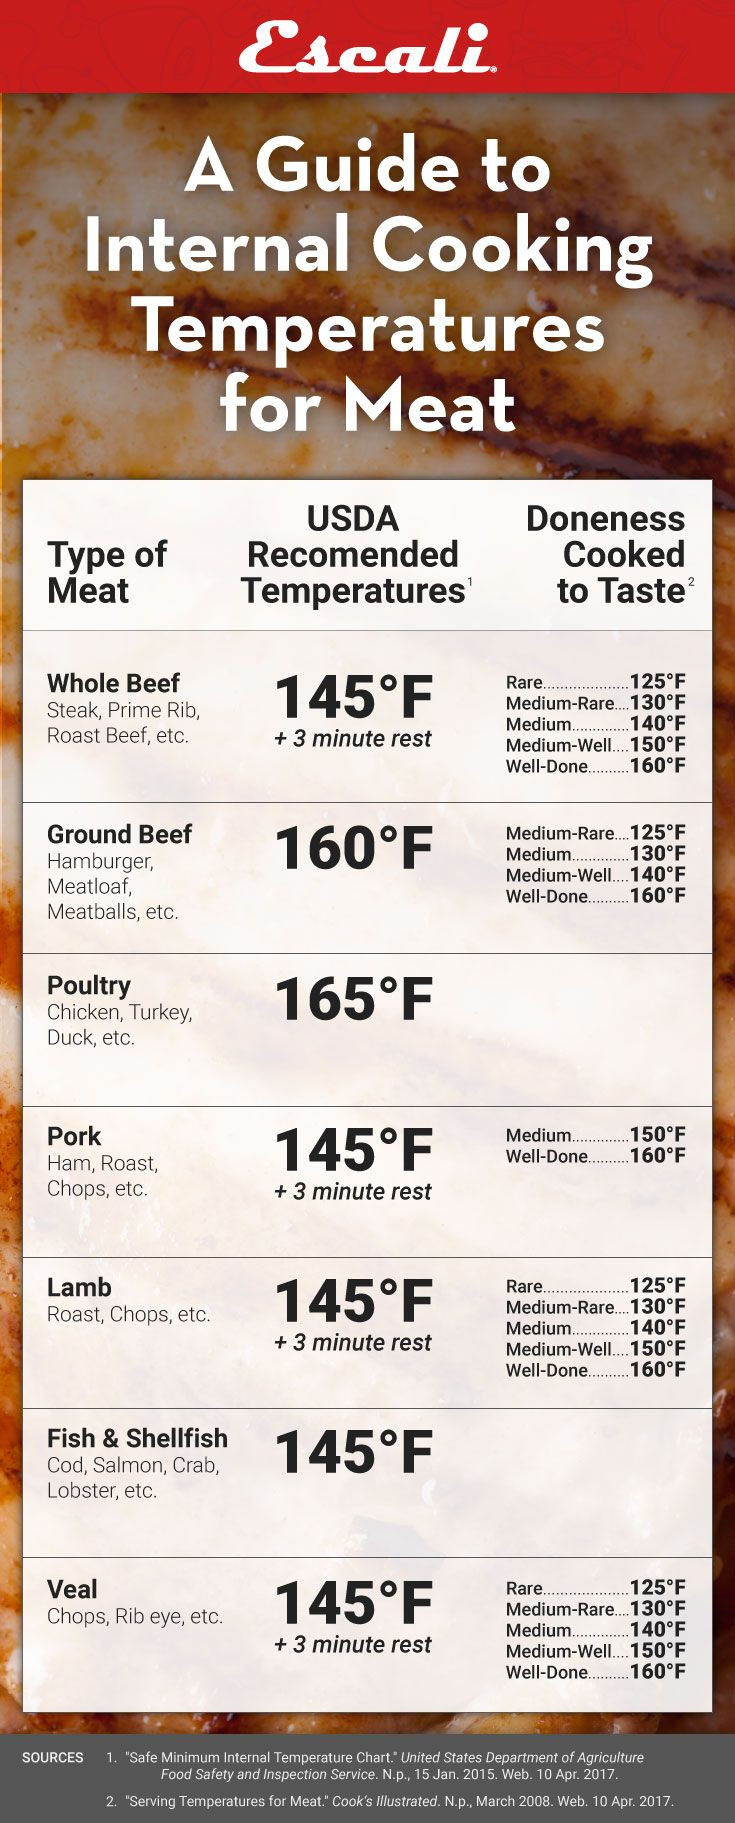 Cook Ground Beef to A Minimum Internal Temperature Of Beautiful A Guide to Internal Cooking Temperature for Meat Escali